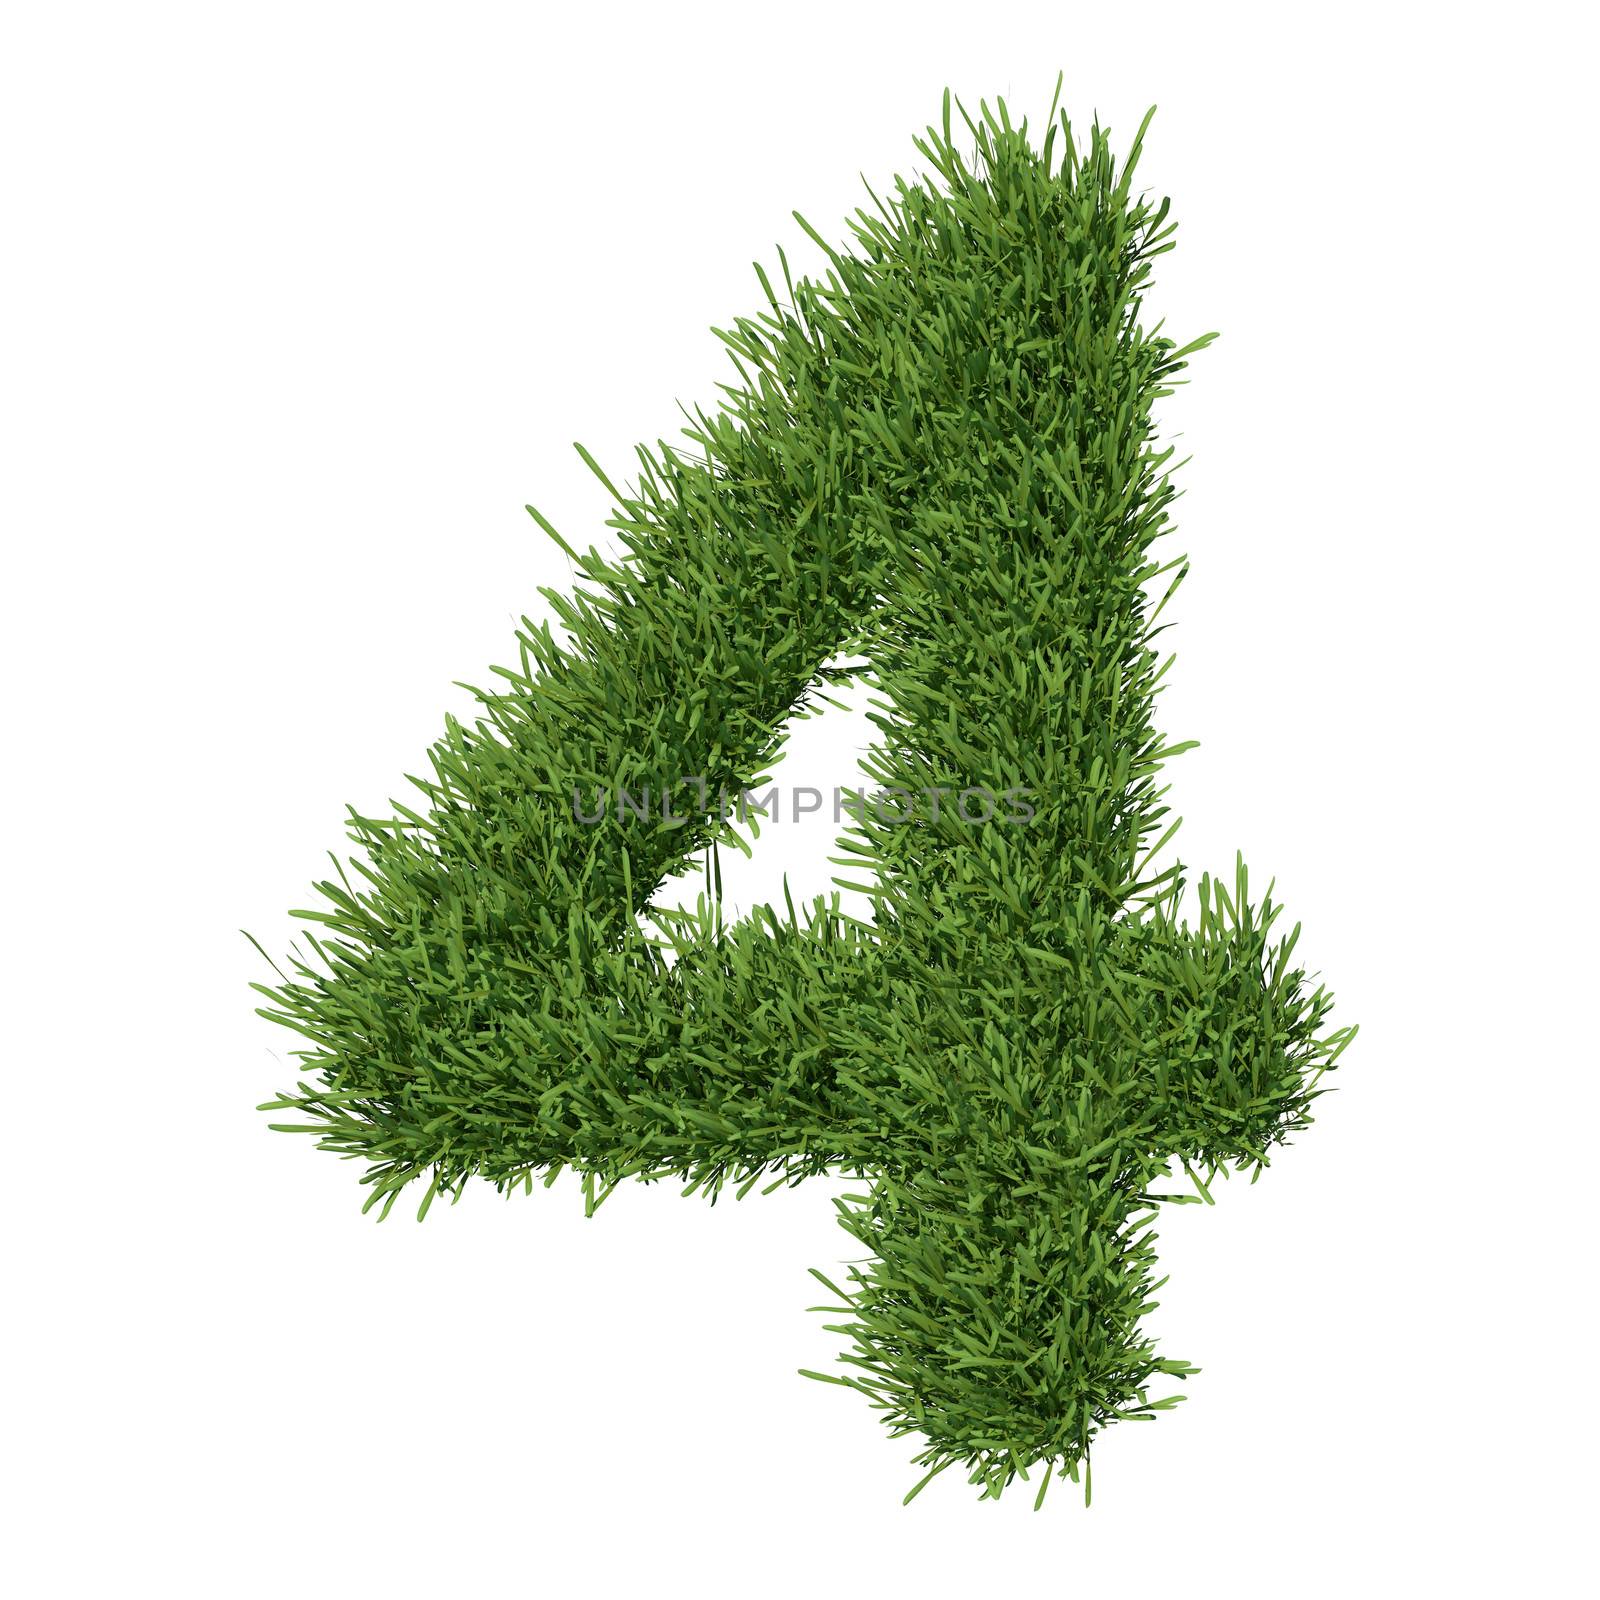 Arabic numeral made ​​of grass by cherezoff